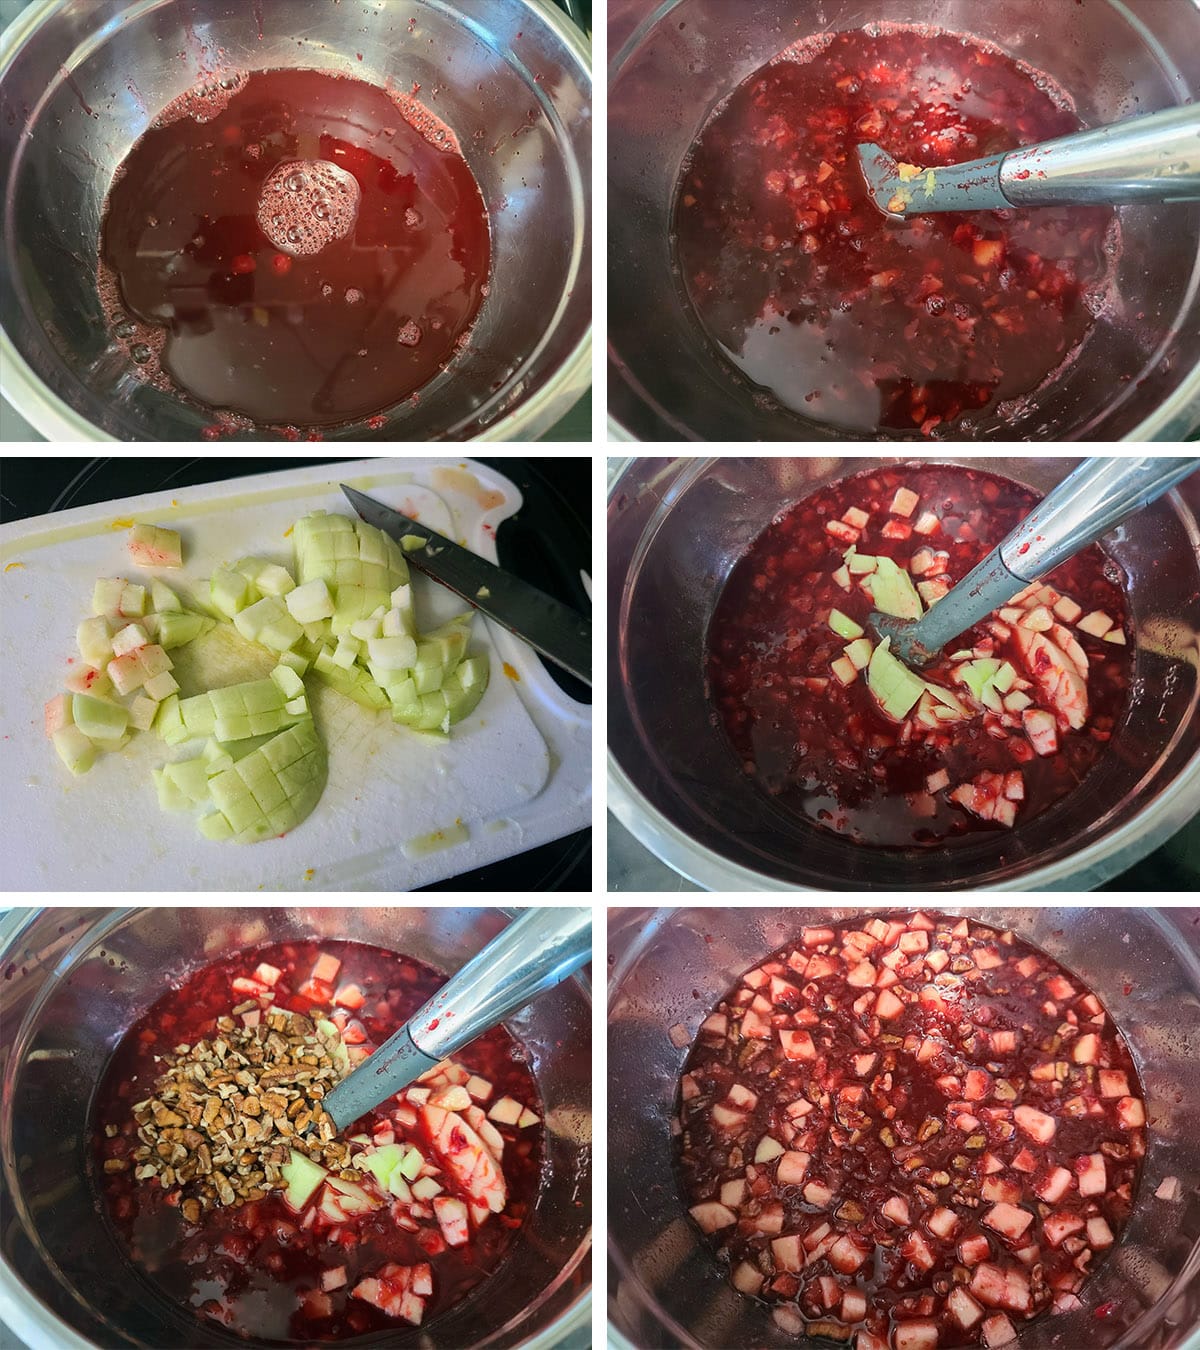 A 6 part image showing the apples and walnuts being stirred in to the Jello mixture.